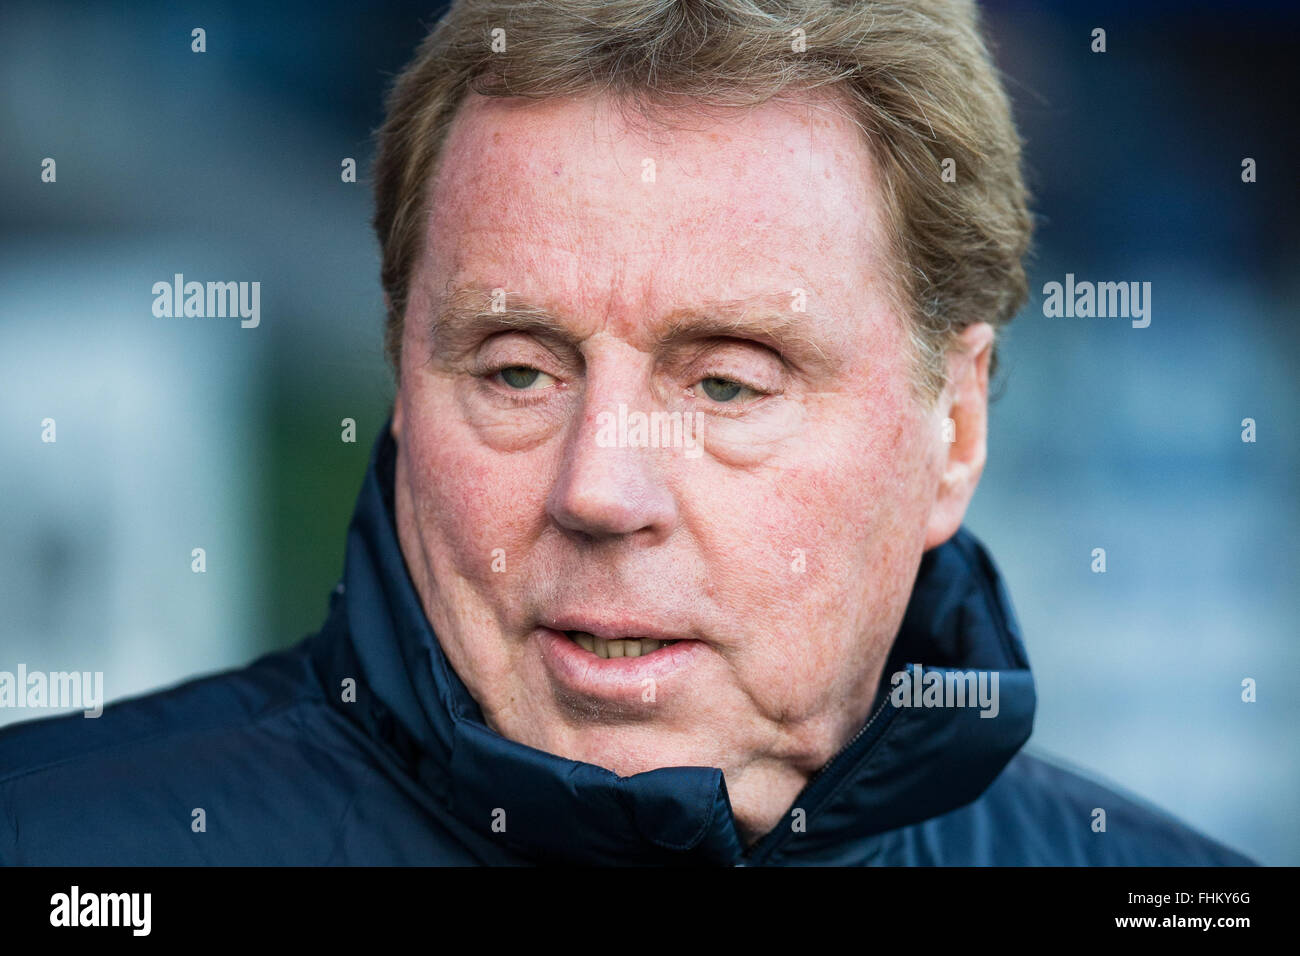 QPR manager, Harry Redknapp, watches his side take on Burnley at Loftus Road on December, 6, 2014. Stock Photo